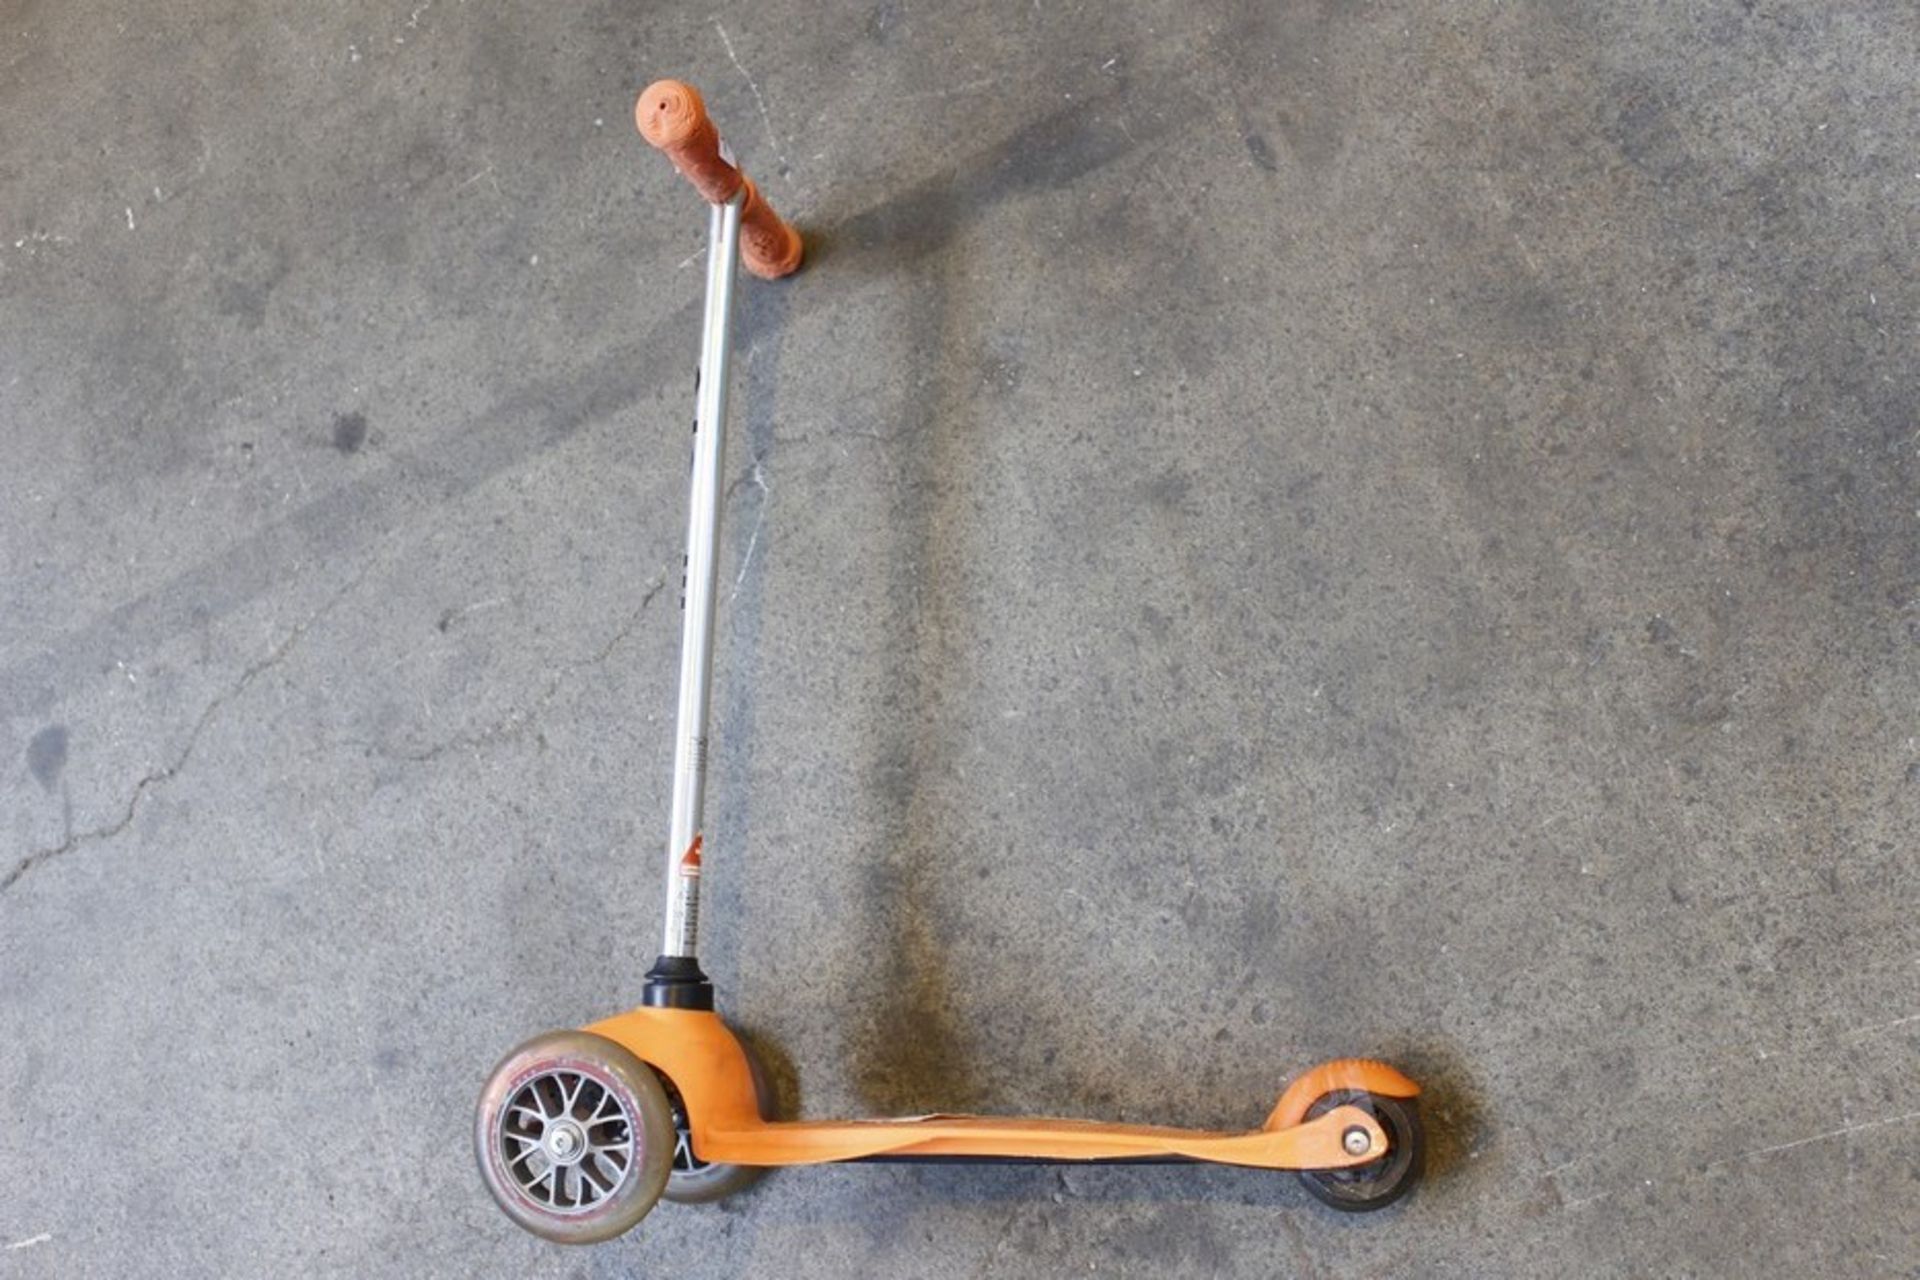 1 x MAXI MICRO CHILDRNES SCOOTER(587335)  *PLEASE NOTE THAT THE BID PRICE IS MULTIPLIED BY THE